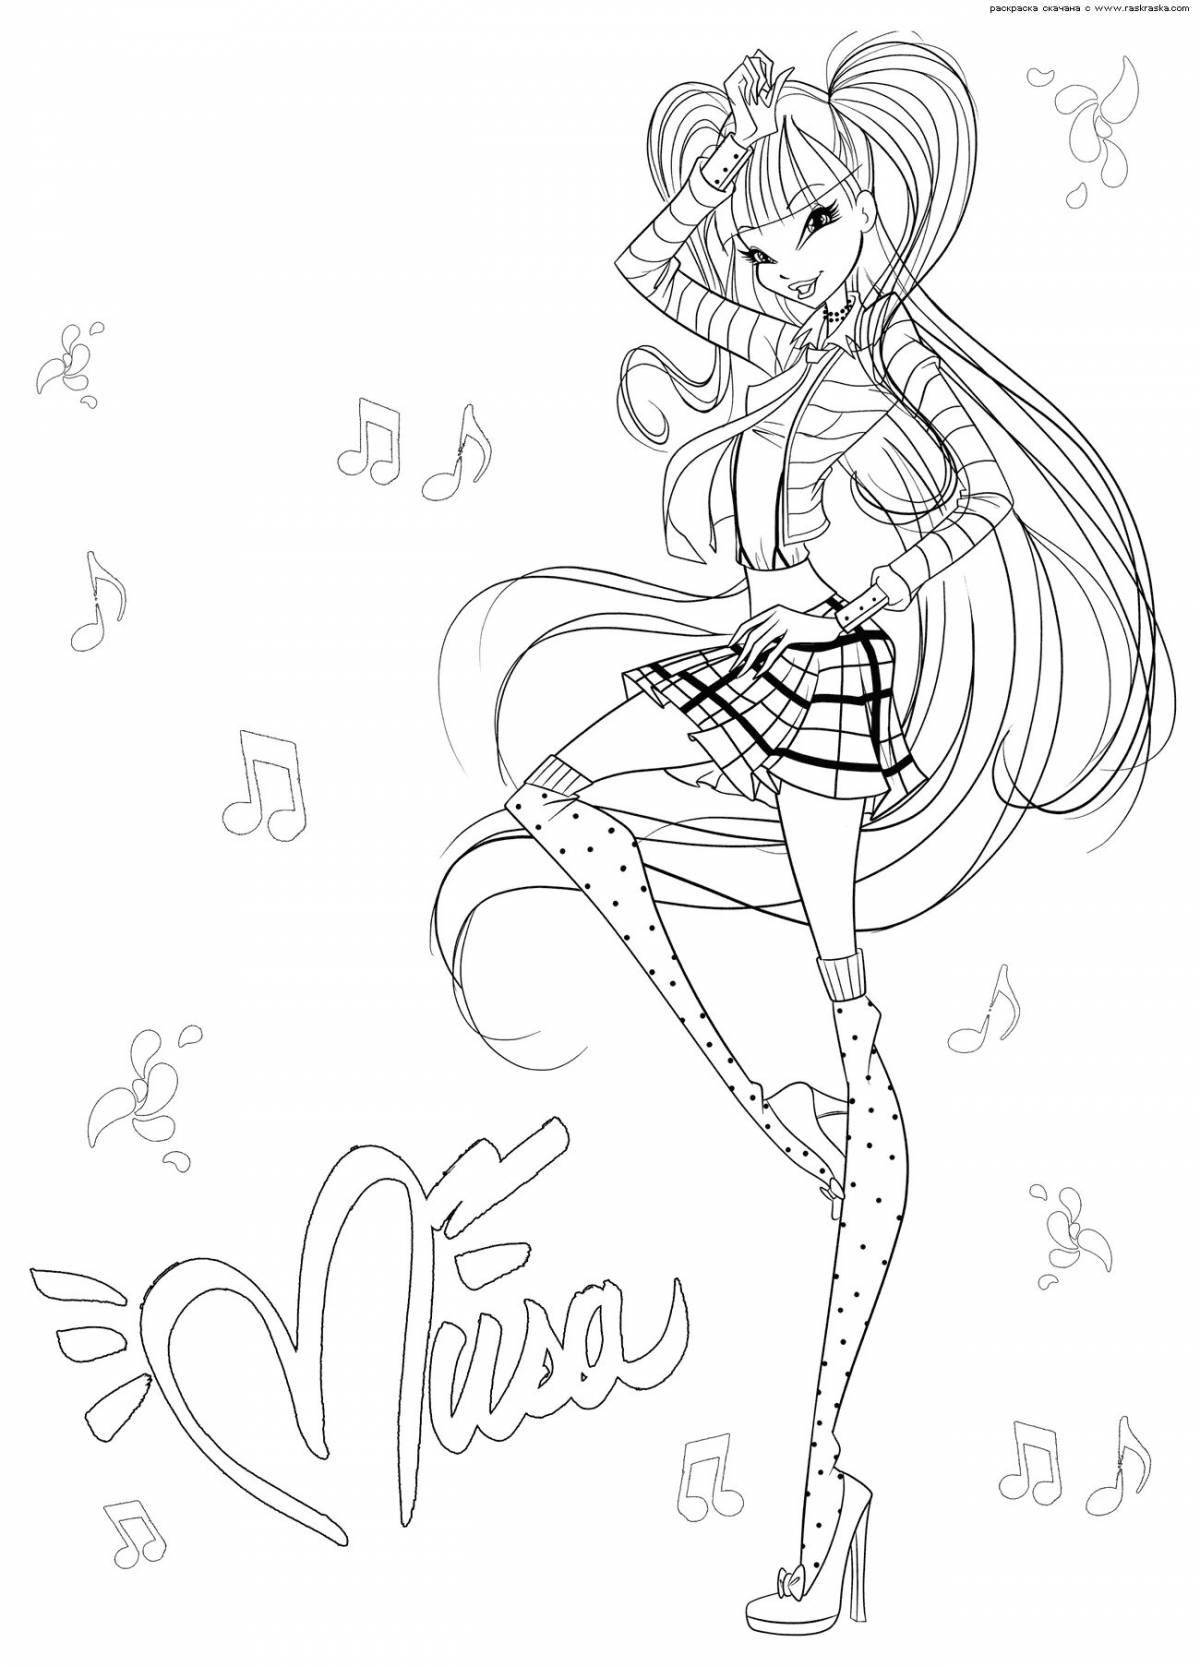 Dazzling winx space coloring page